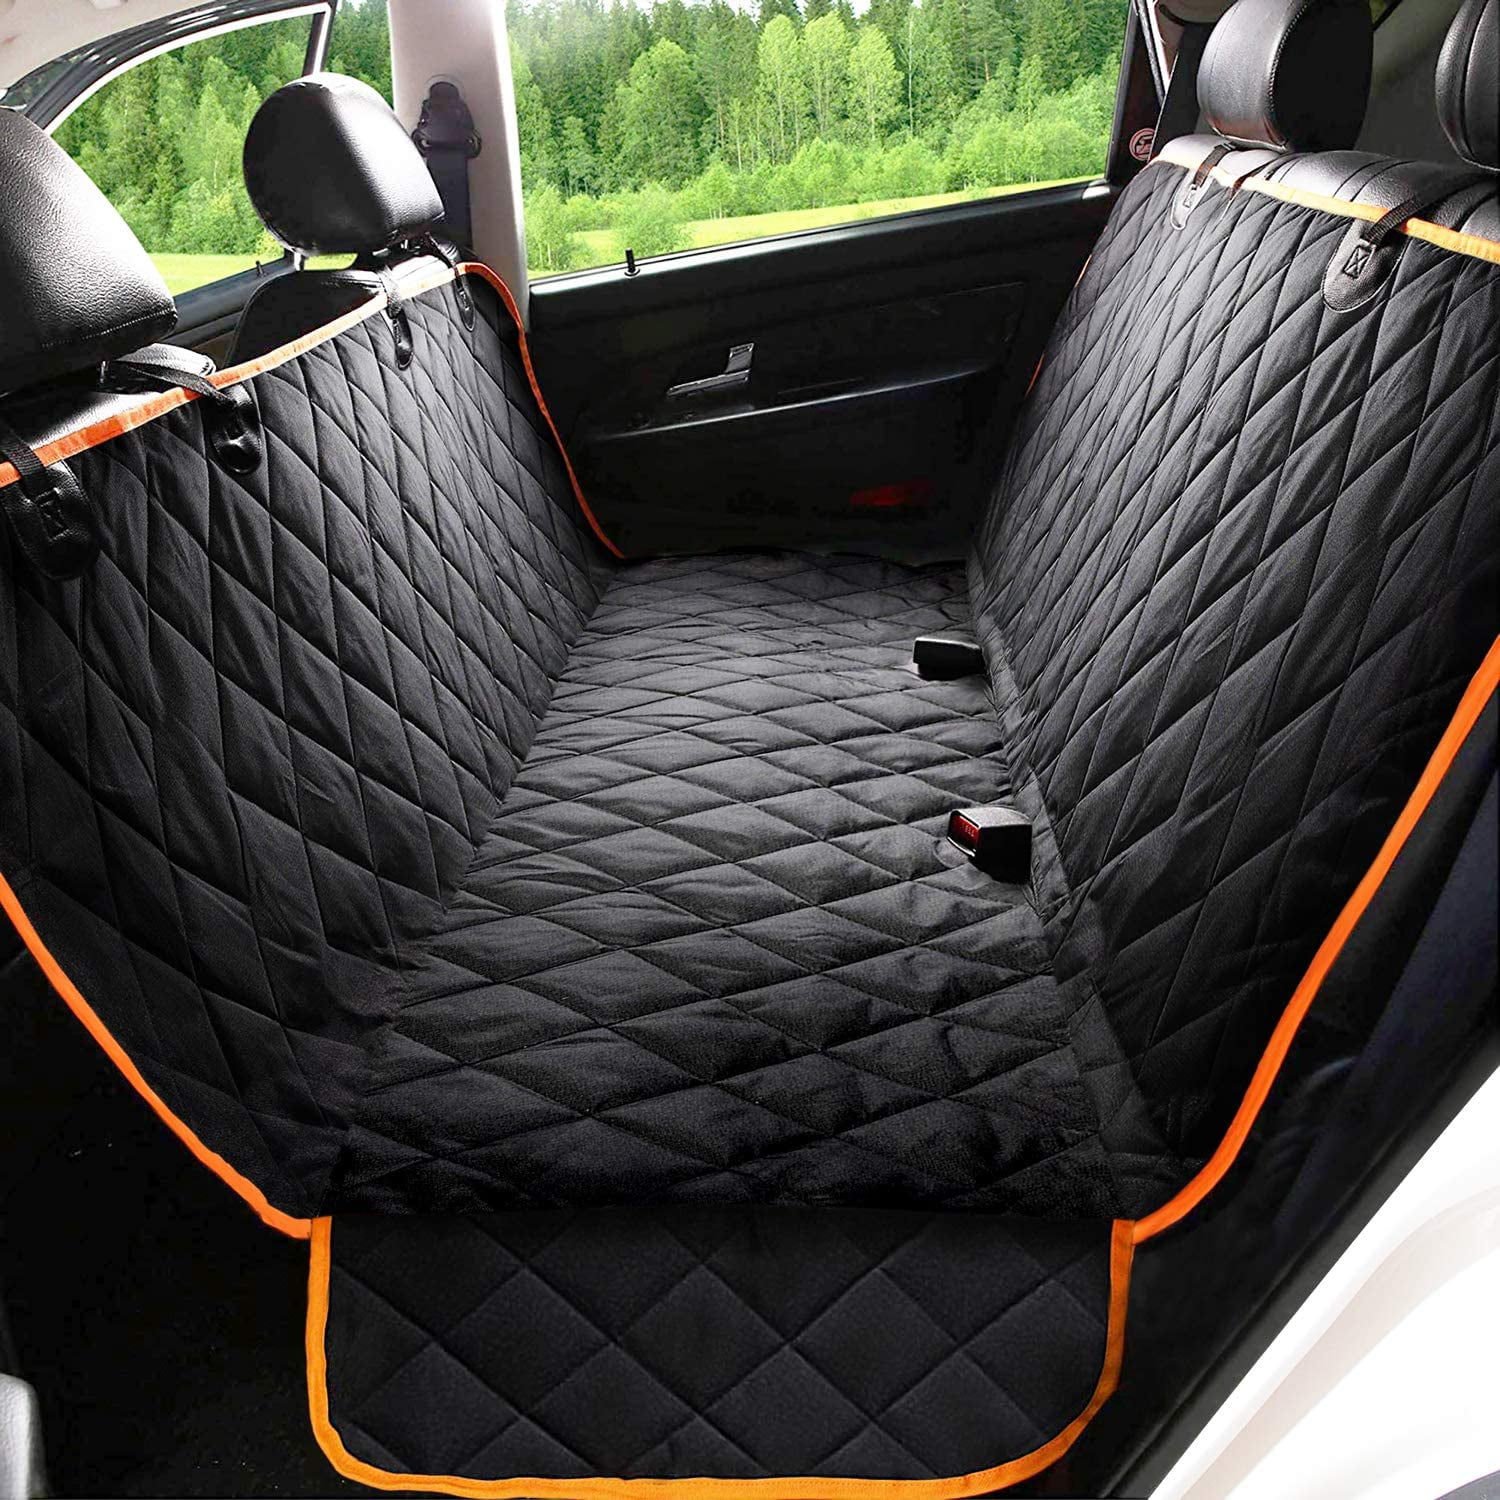 Heavy Duty Car Seat Covers Sale, SAVE 31%